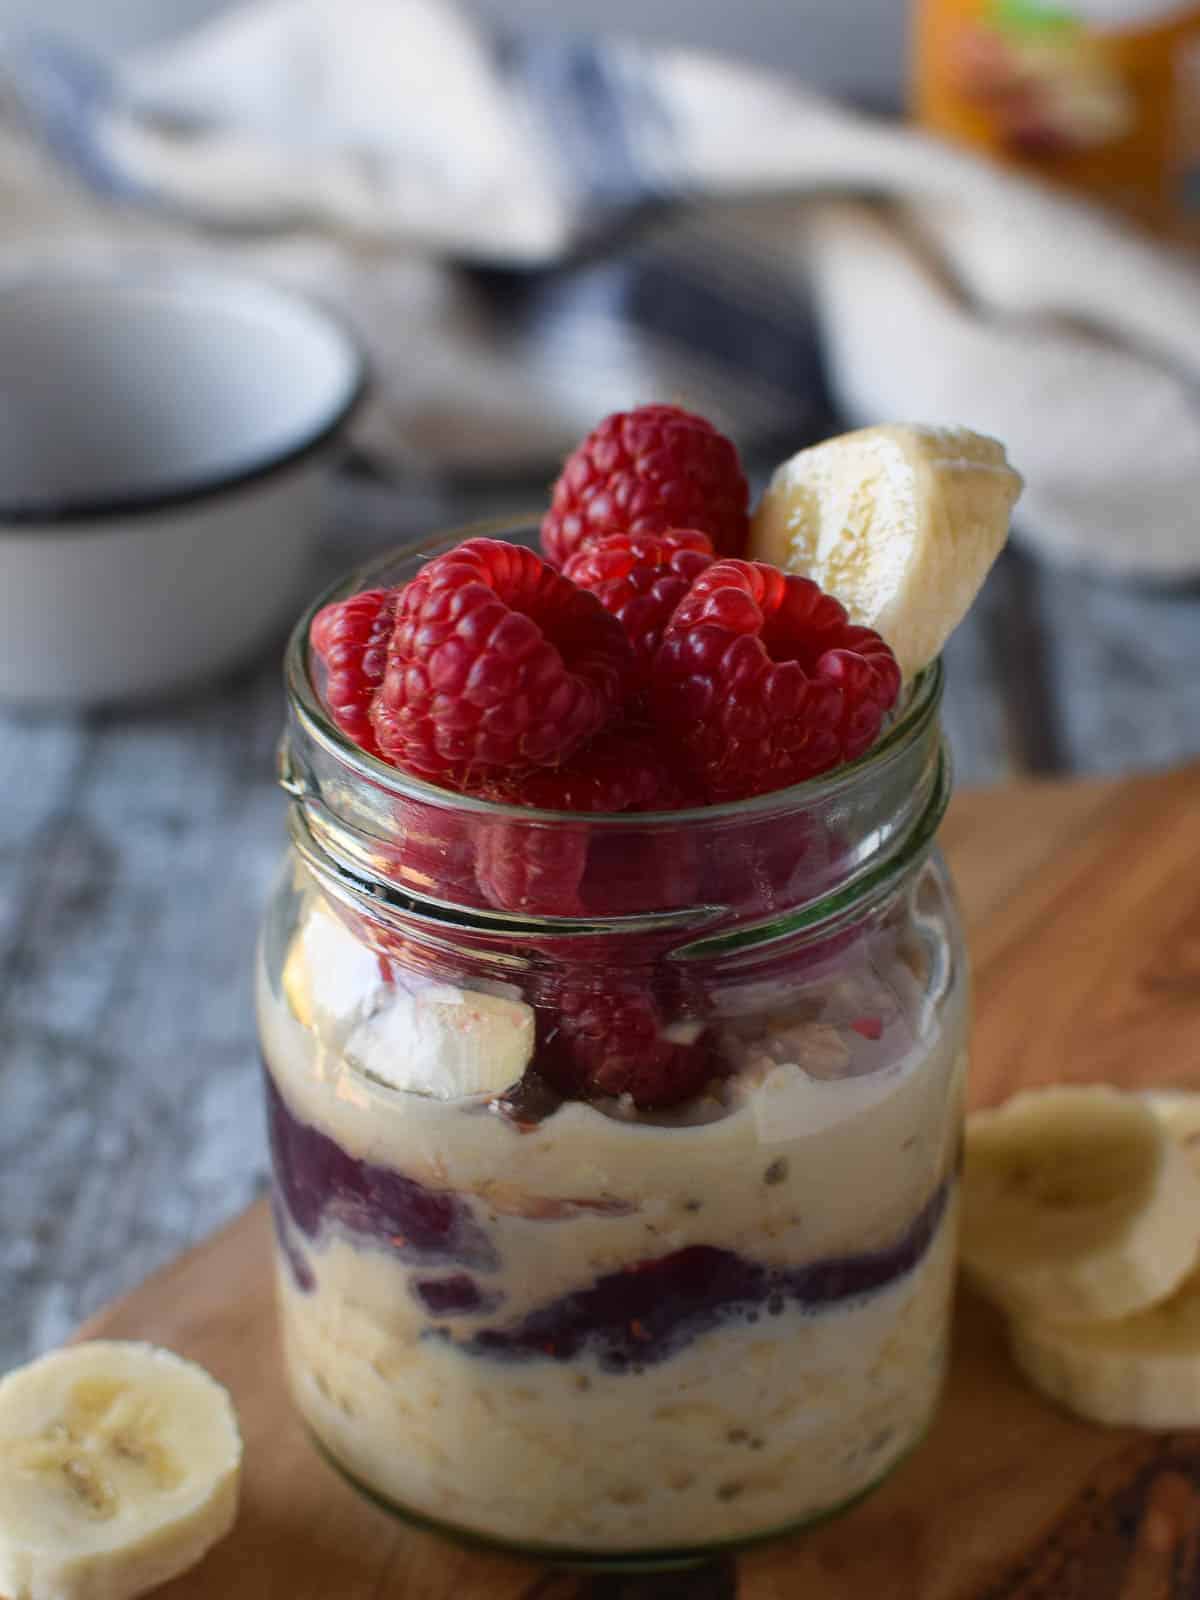 Close-up of peanut butter overnight oats in a jar with raspberries and bananas.